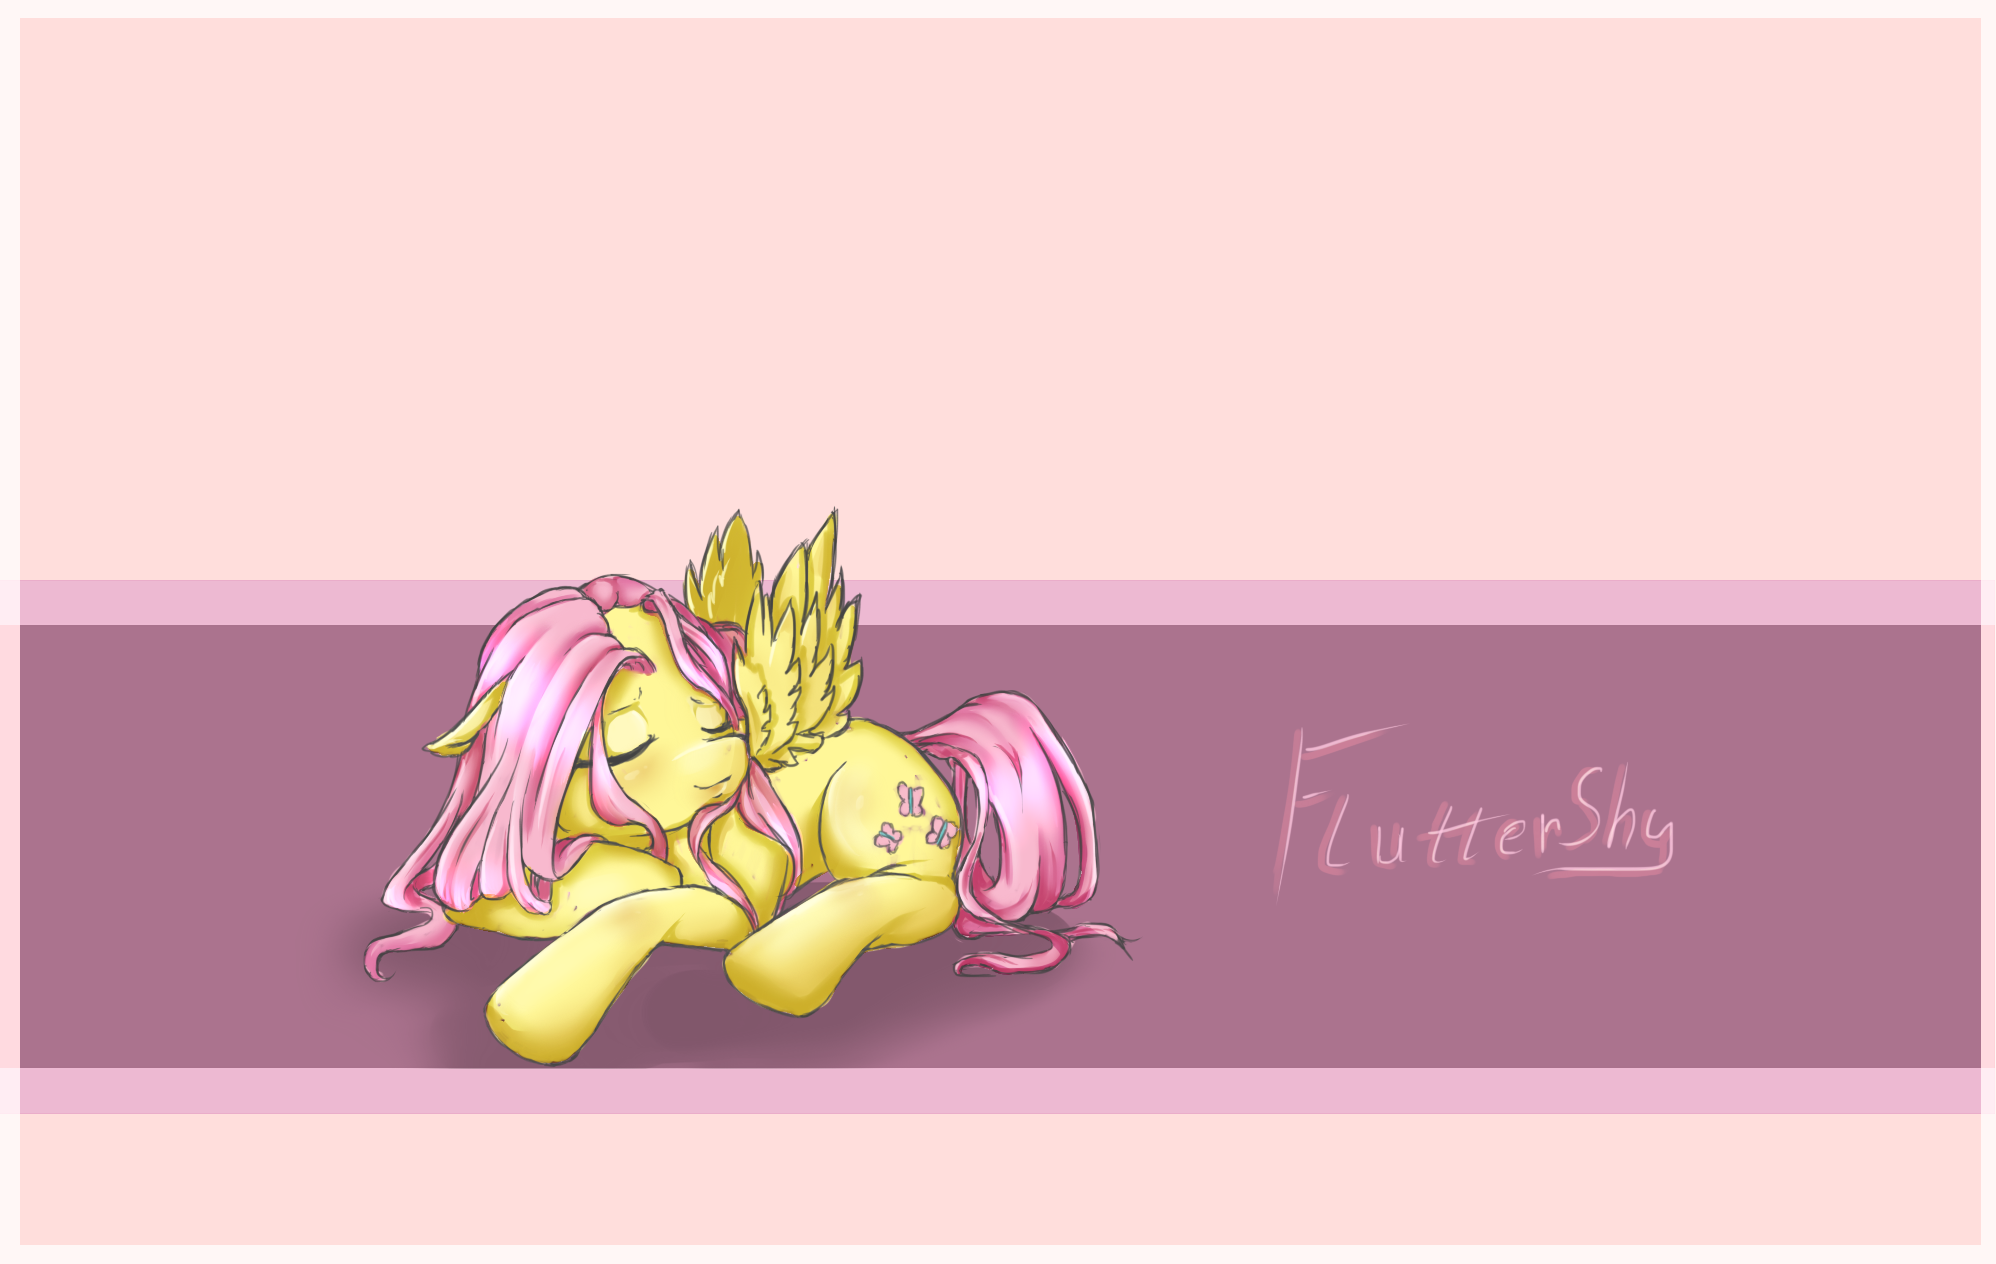 Fluttershy by Crisis16